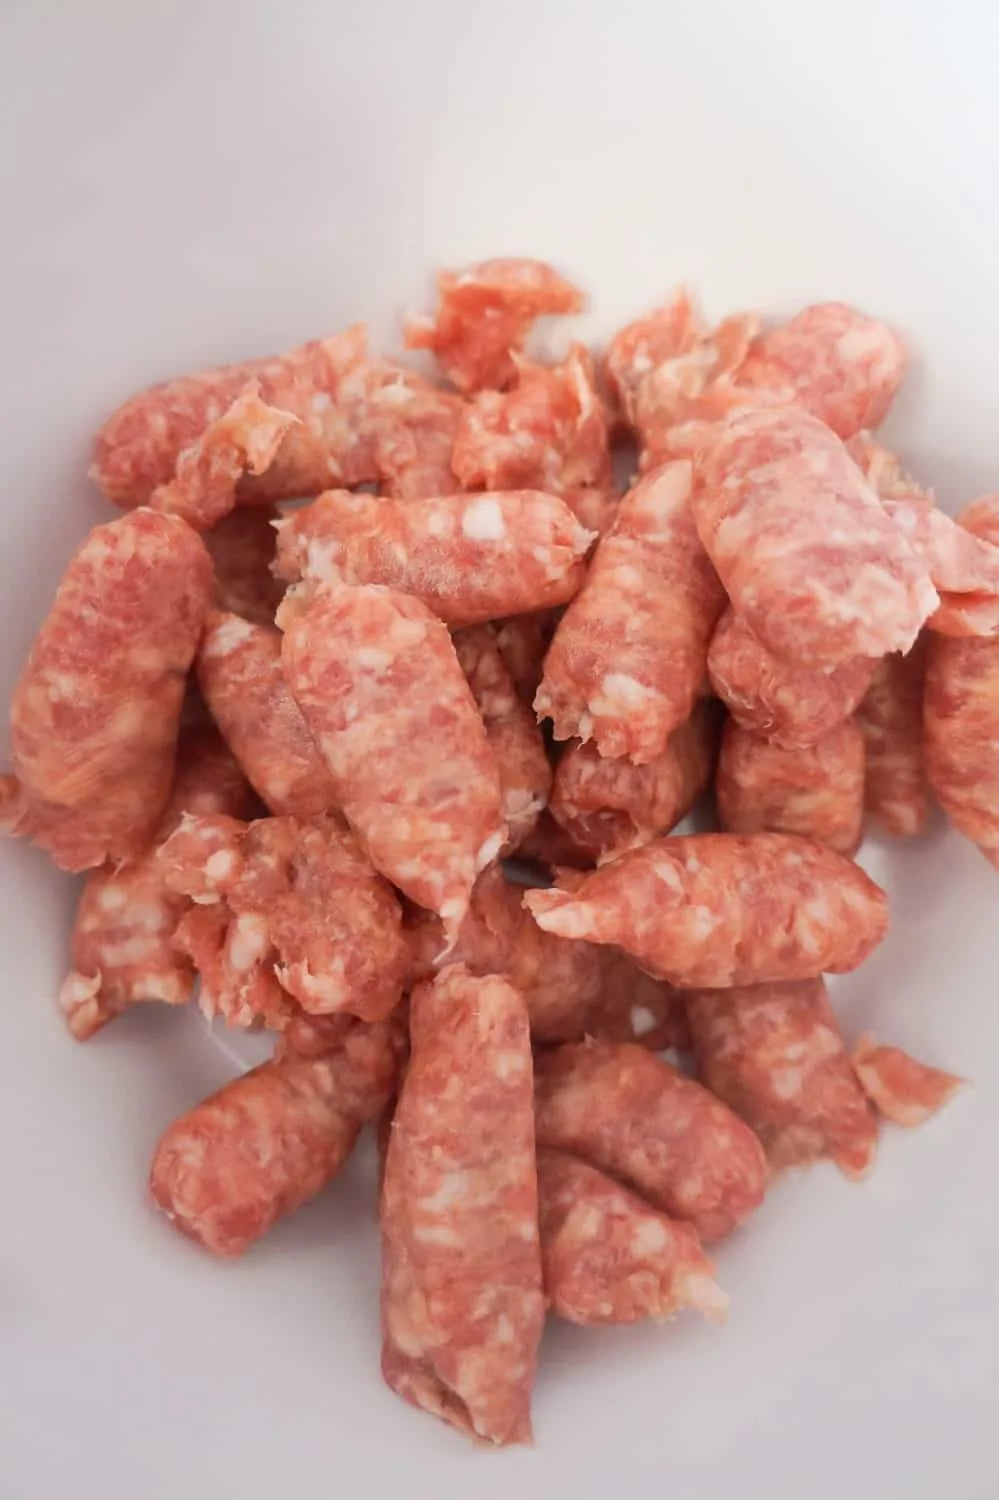 breakfast sausage meat removed from casings